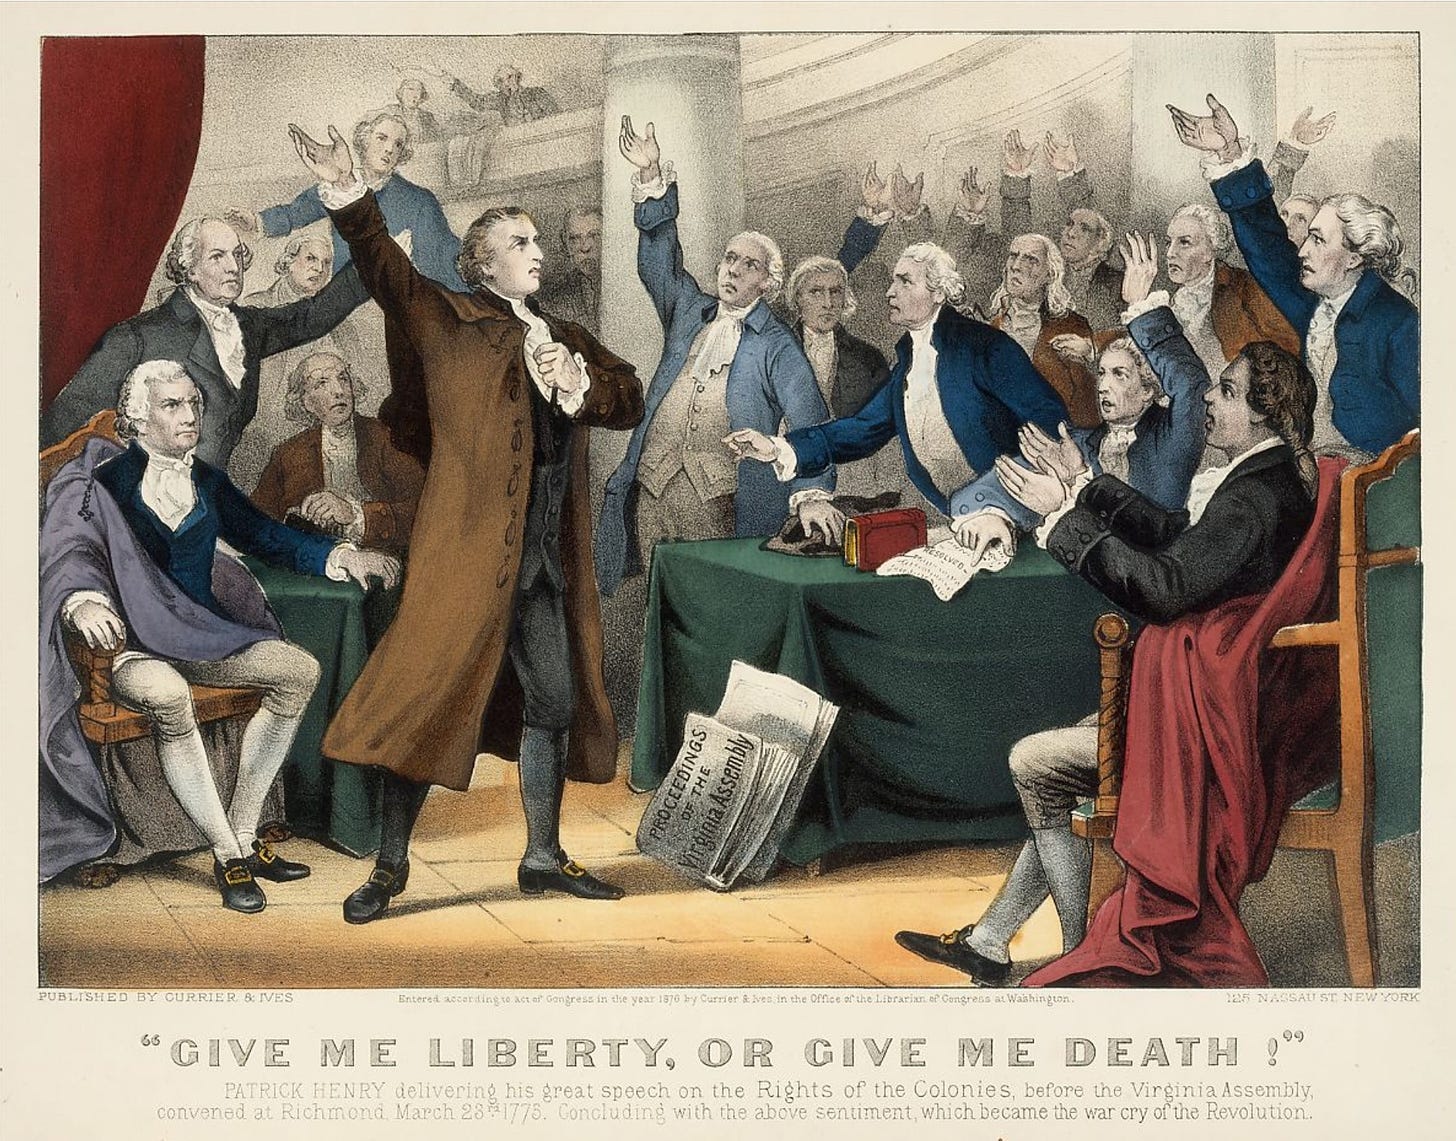 Currier & Ives print (1876): "Give Me Liberty or Give Me Death!–Patrick Henry delivering his great speech on the Rights of the Colonies, before the Virginia Assembly, convened at Richmond, March 23rd, 1775. Concluding with the above sentiment, which became the war cry of the Revolution" 